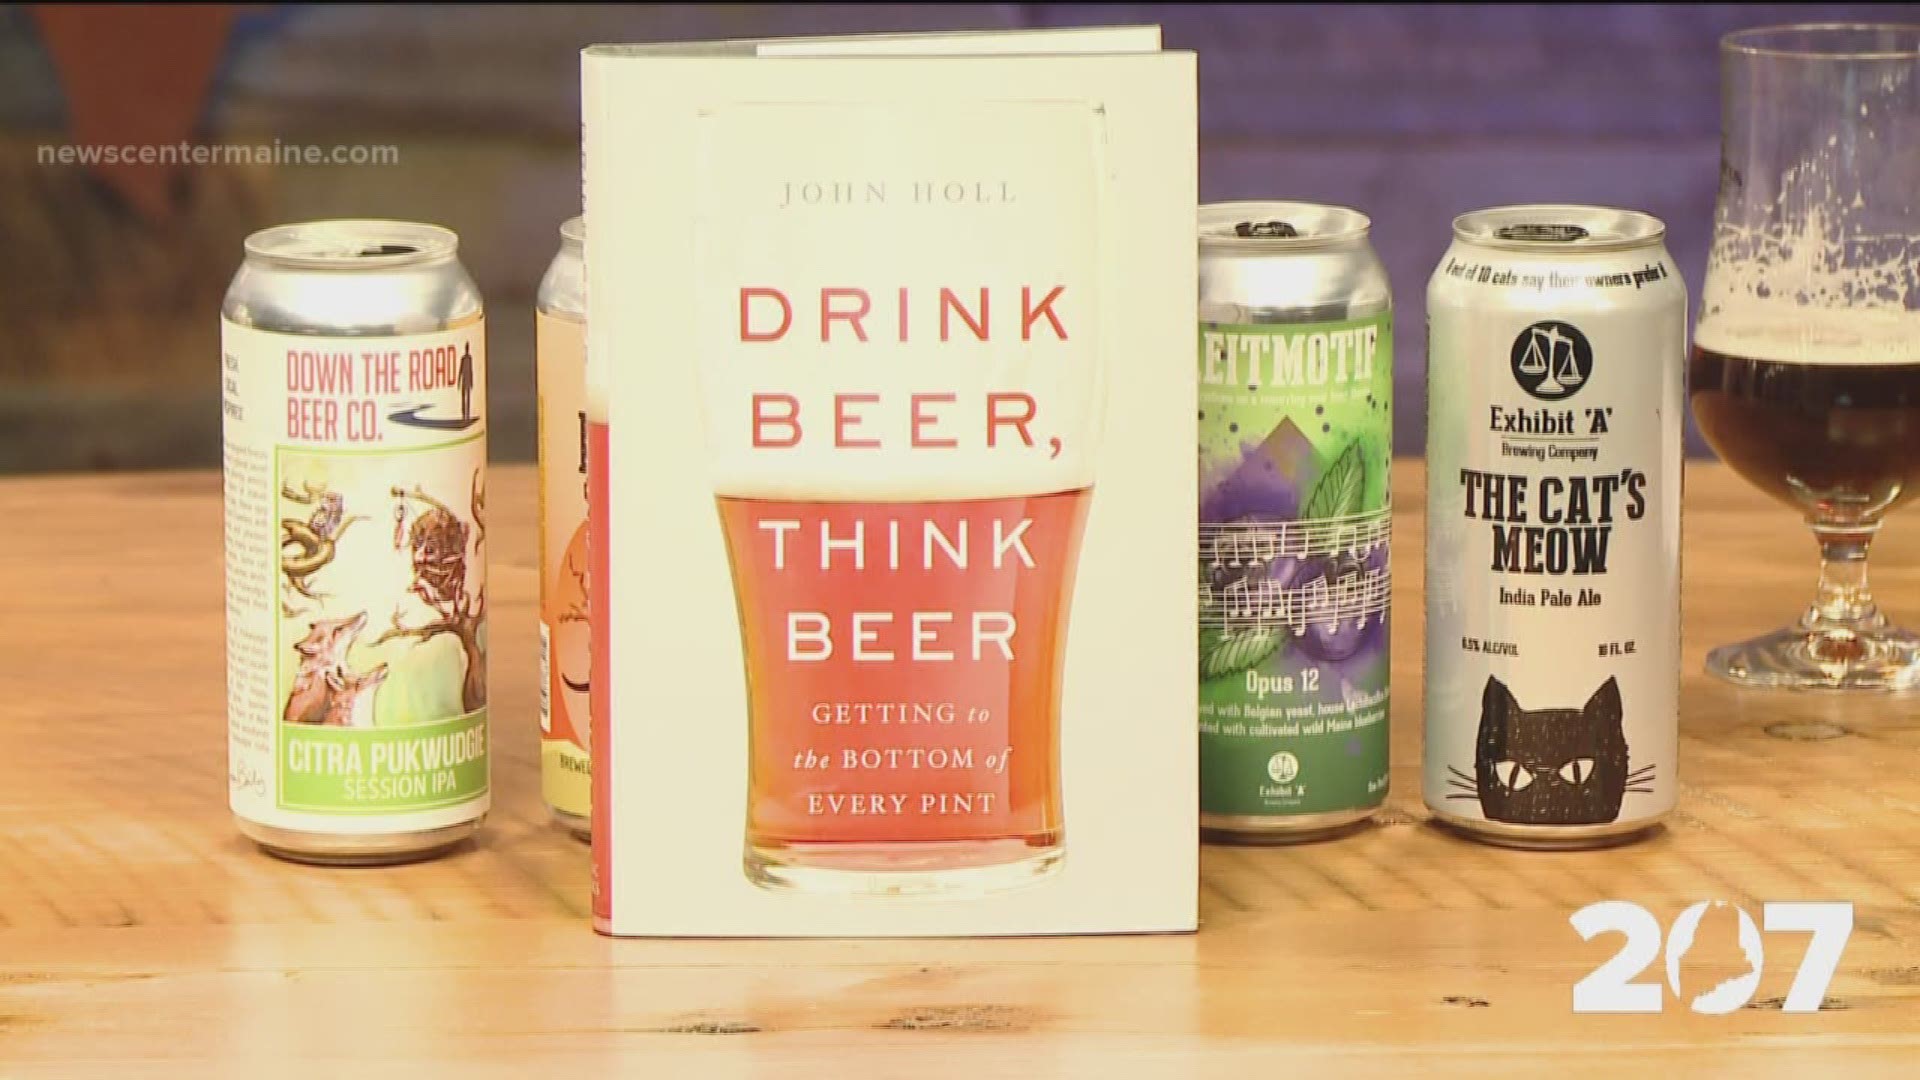 Drink Beer, Think Beer. John Holl wrote the book and likes to talk about beer and drink beer.